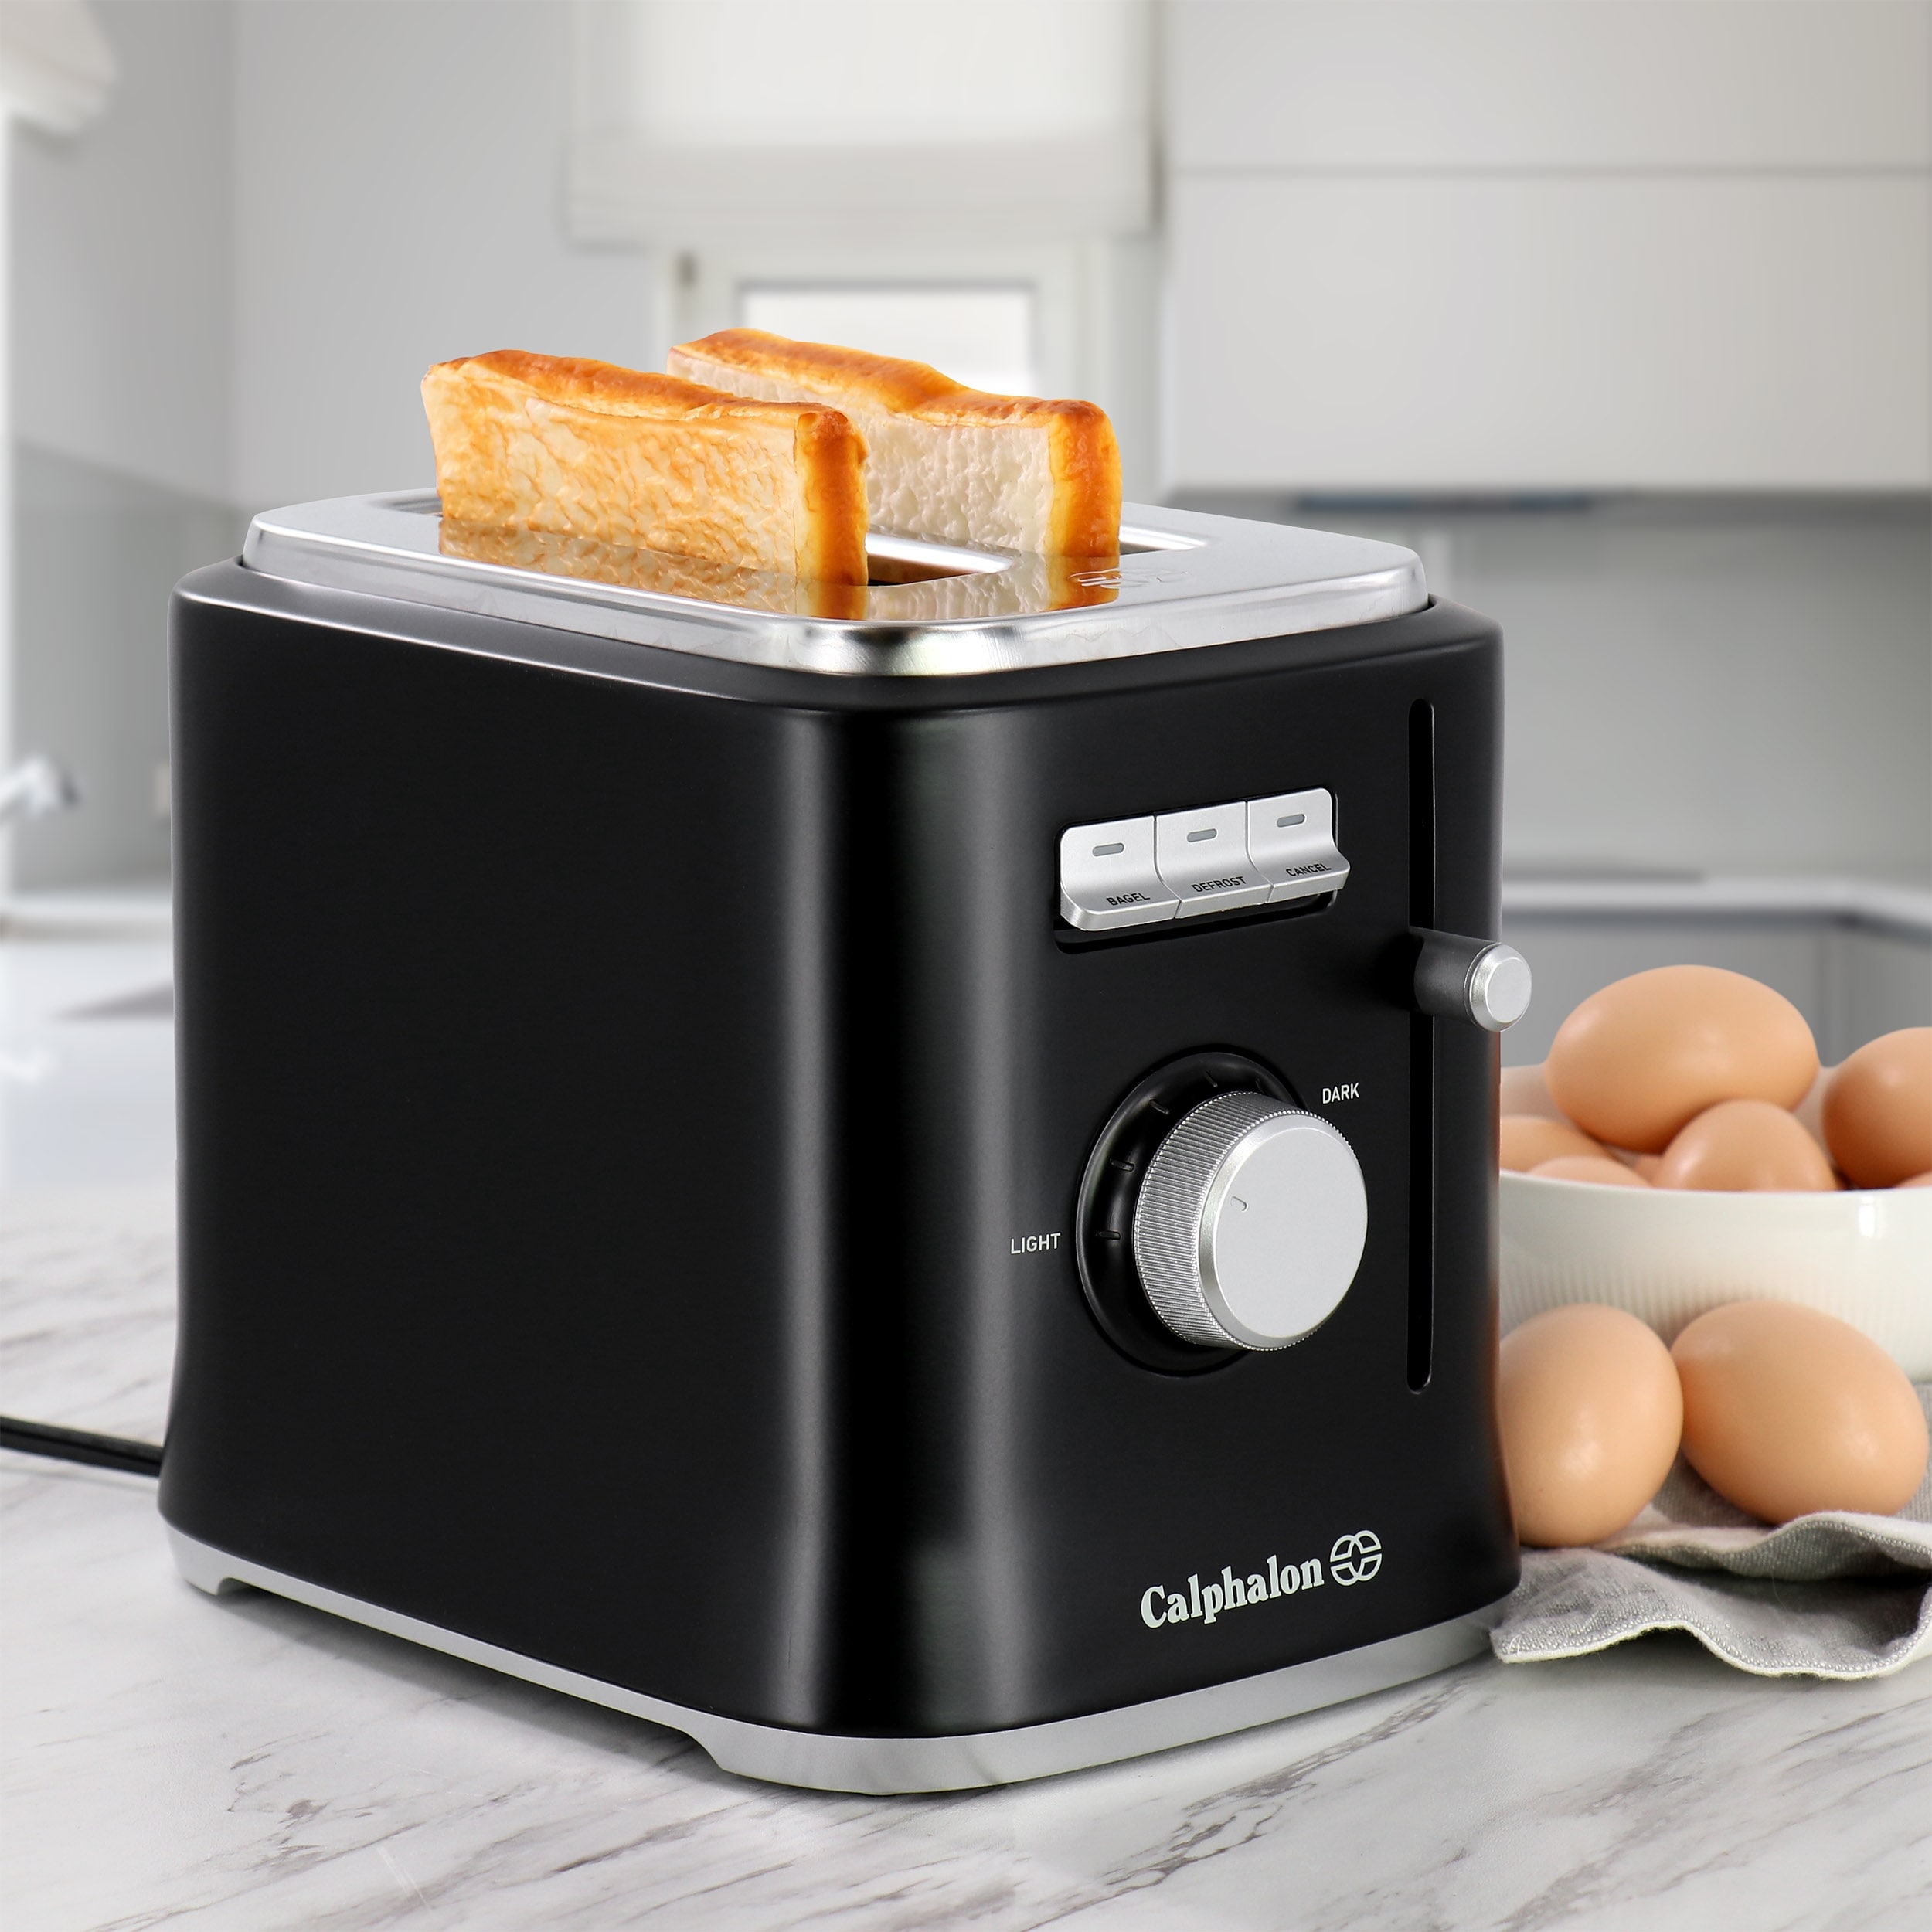 https://ak1.ostkcdn.com/images/products/is/images/direct/8346a6812b186f98a37ffeacfda8aac570285248/Precision-Control-2-Slice-Toaster-with-6-Shade-Settings-in-Black.jpg